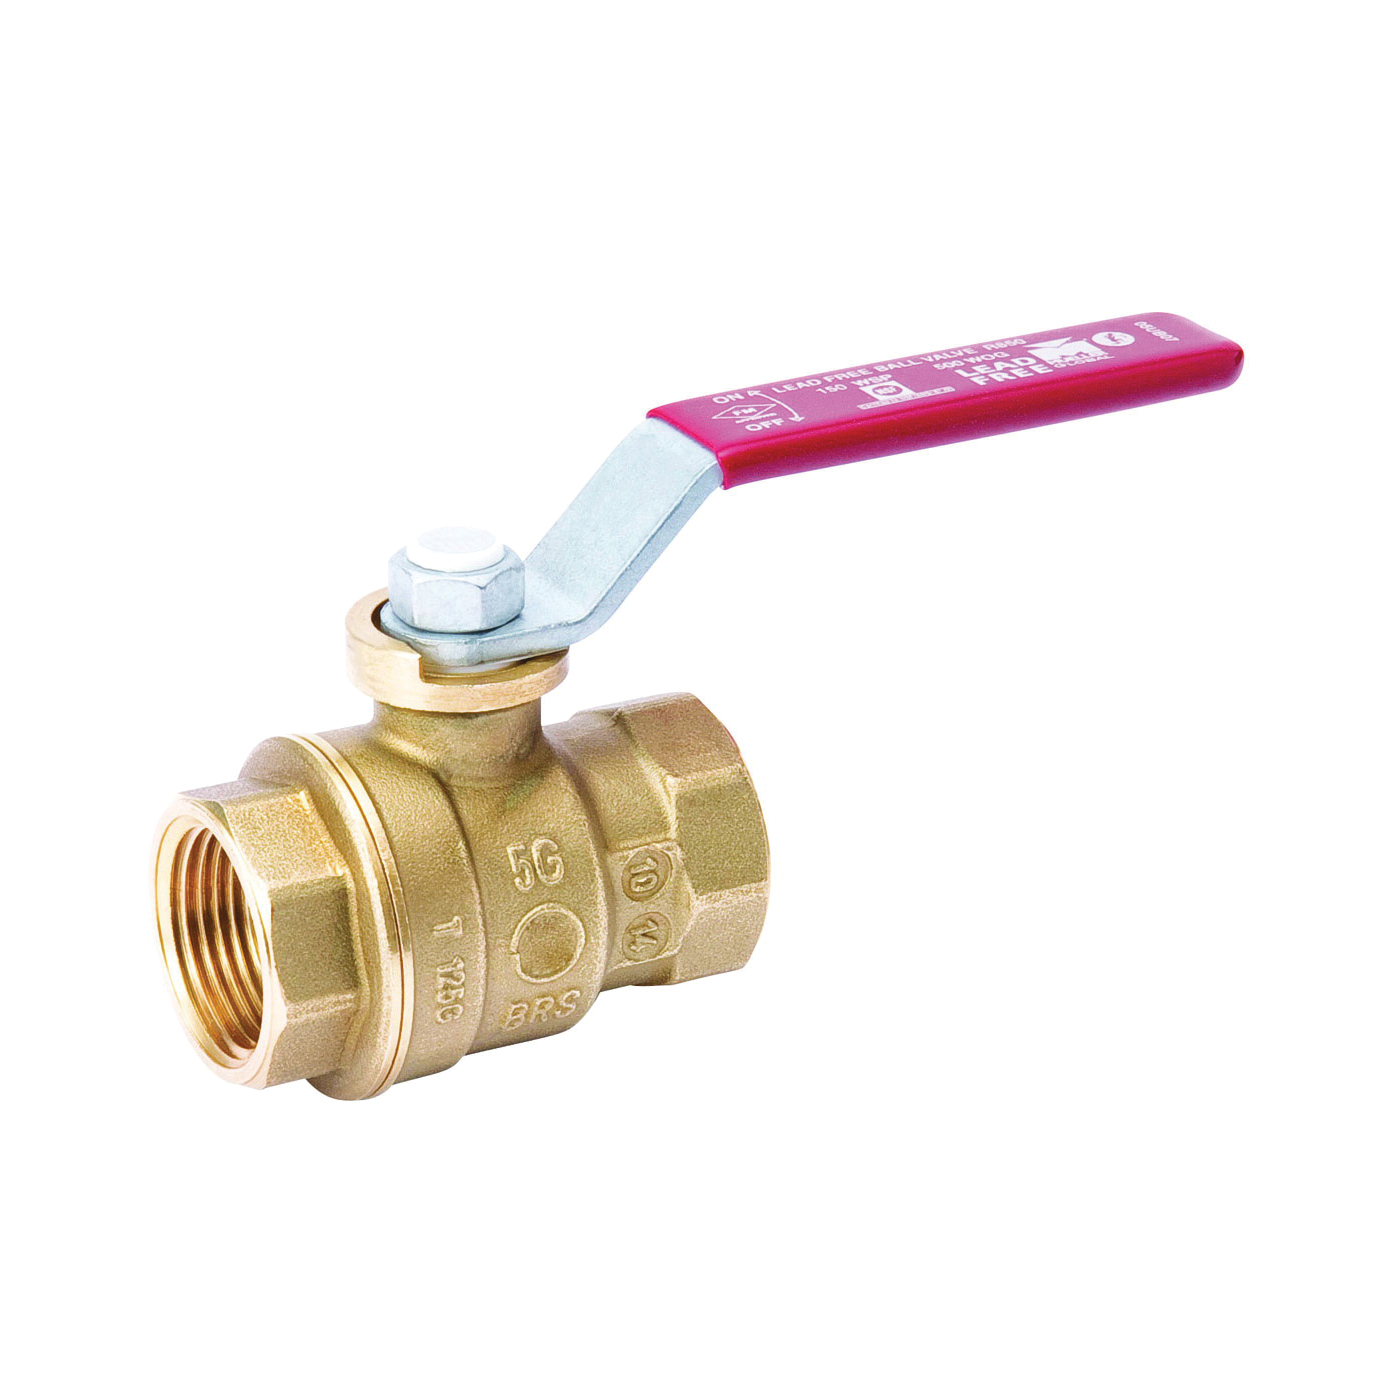 ProLine Series 107-406NL Gas Ball Valve, 1-1/4 in Connection, FPT, 600/150 psi Pressure, Manual Actuator, Brass Body